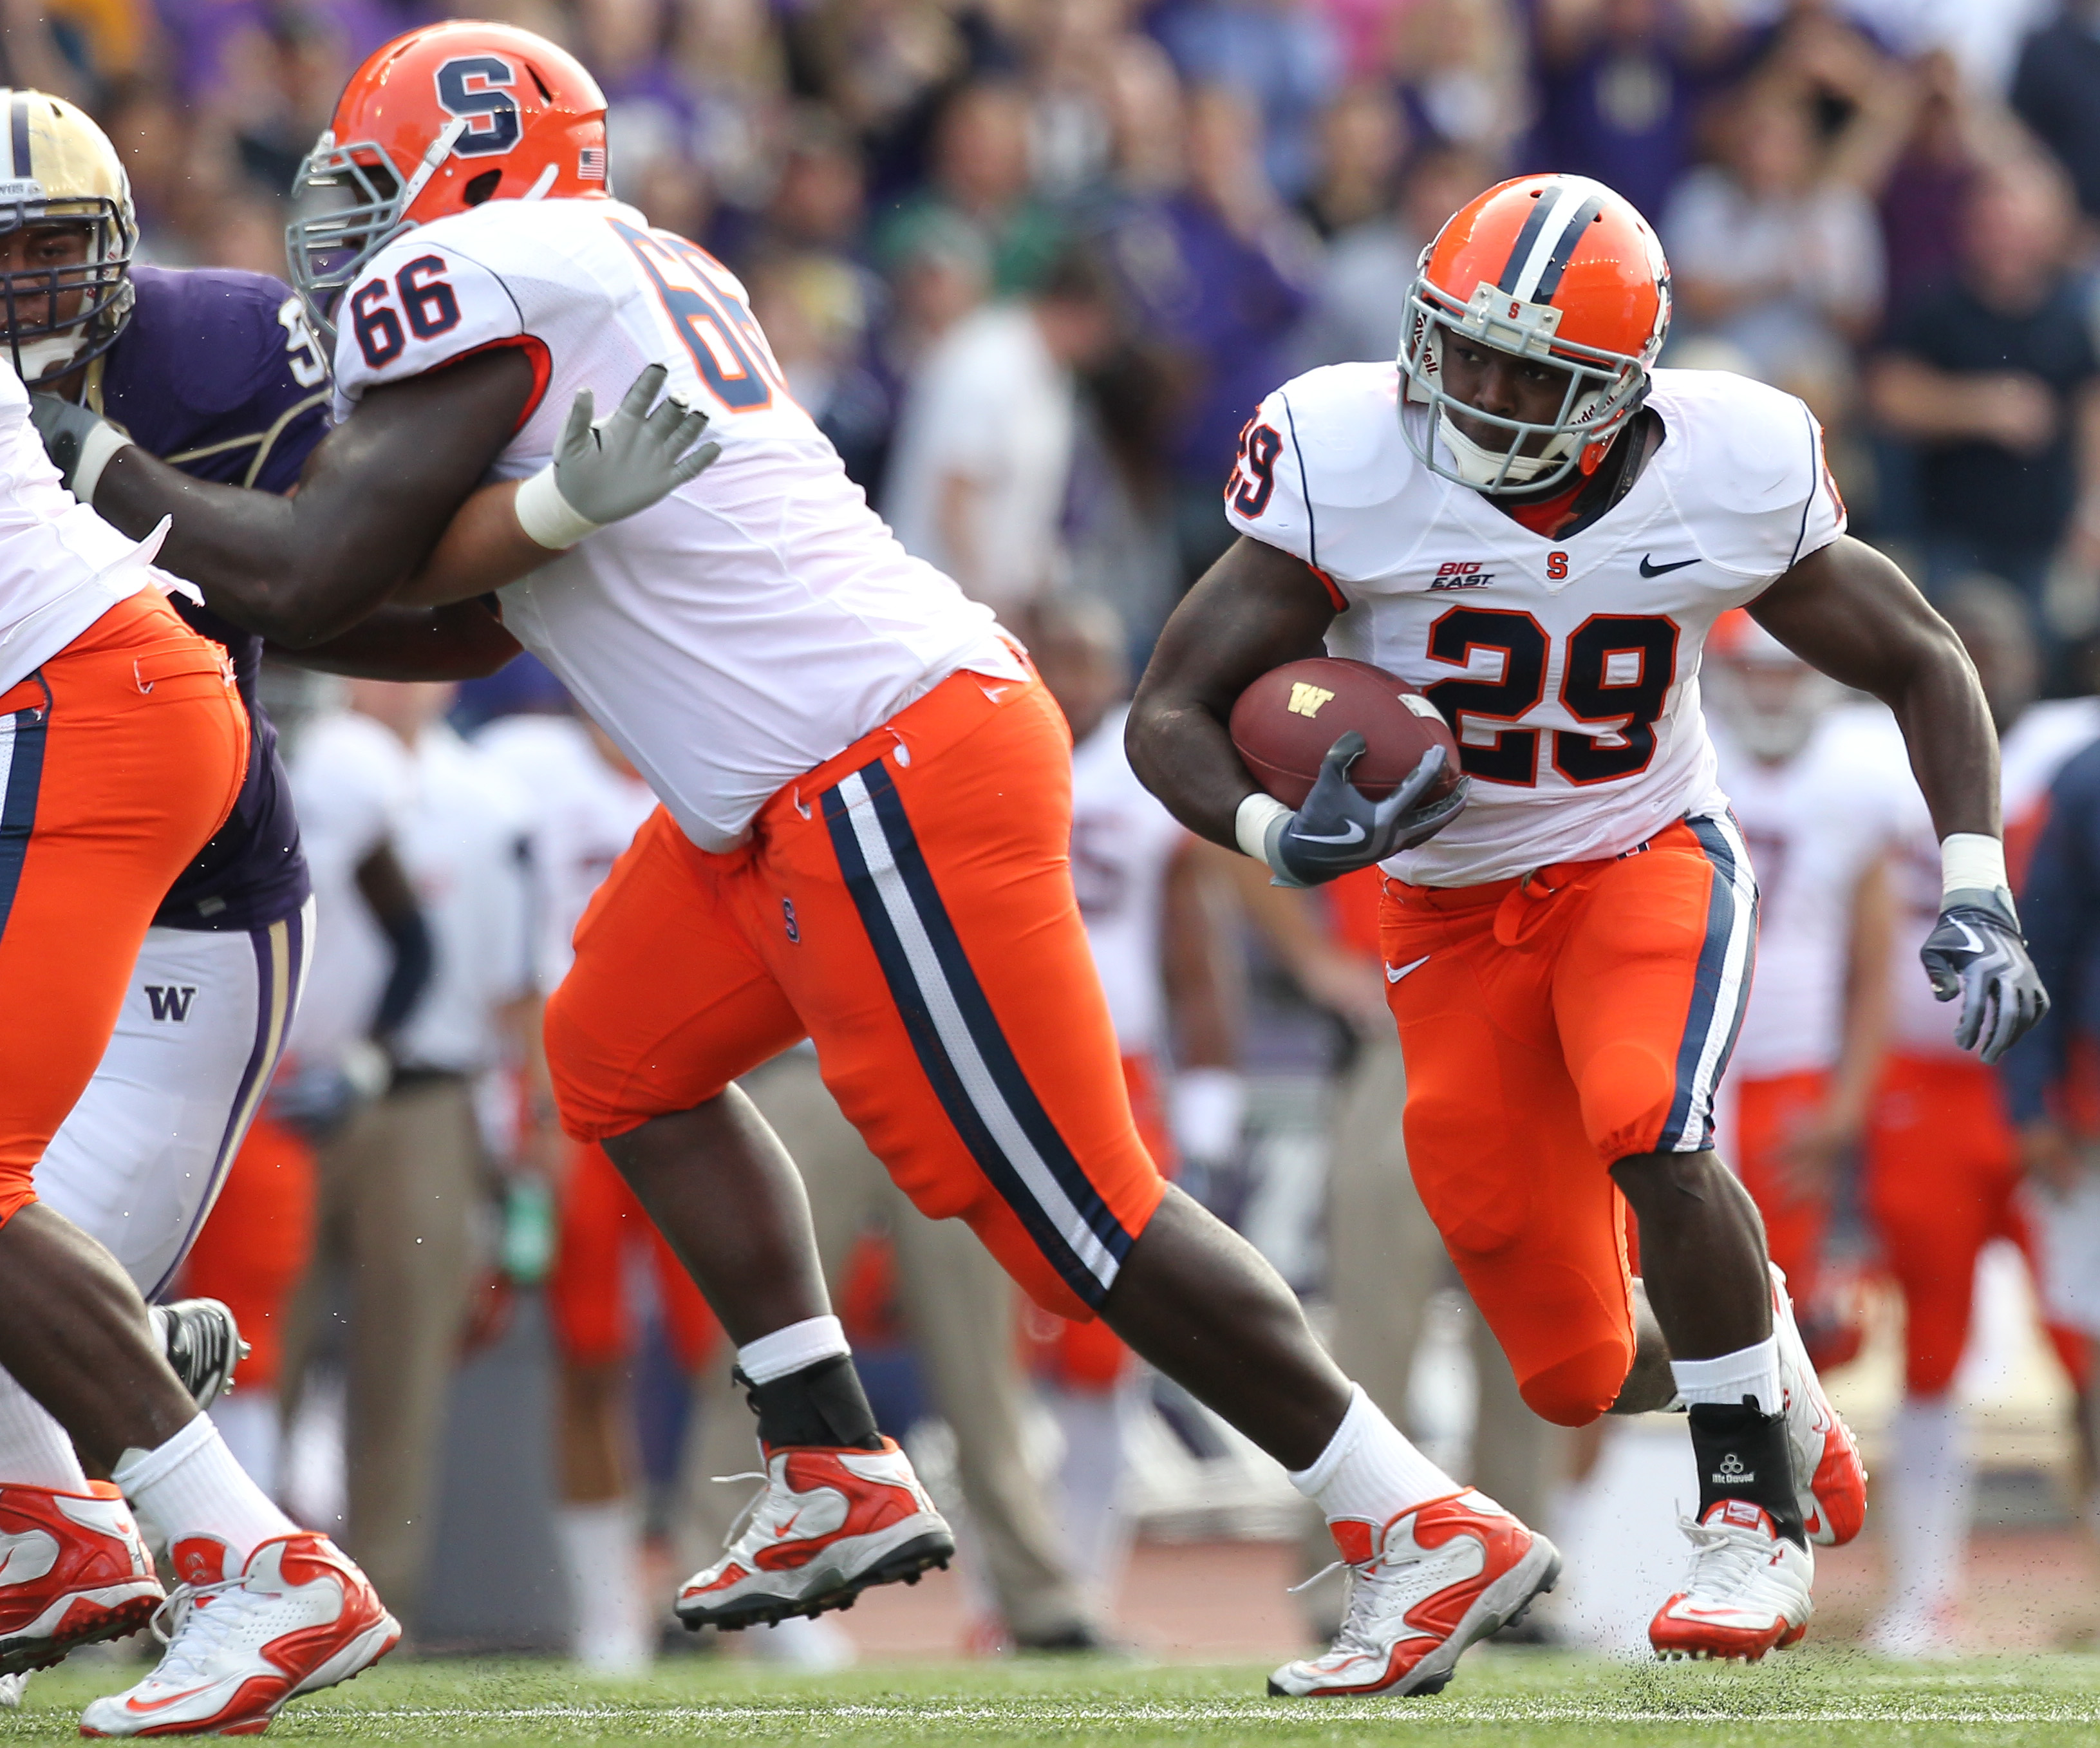 SEATTLE - SEPTEMBER 11:  Running back Antwon Bailey #29 of the Syracuse Orange rushes against the Washington Huskies on September 11, 2010 at Husky Stadium in Seattle, Washington. (Photo by Otto Greule Jr/Getty Images)